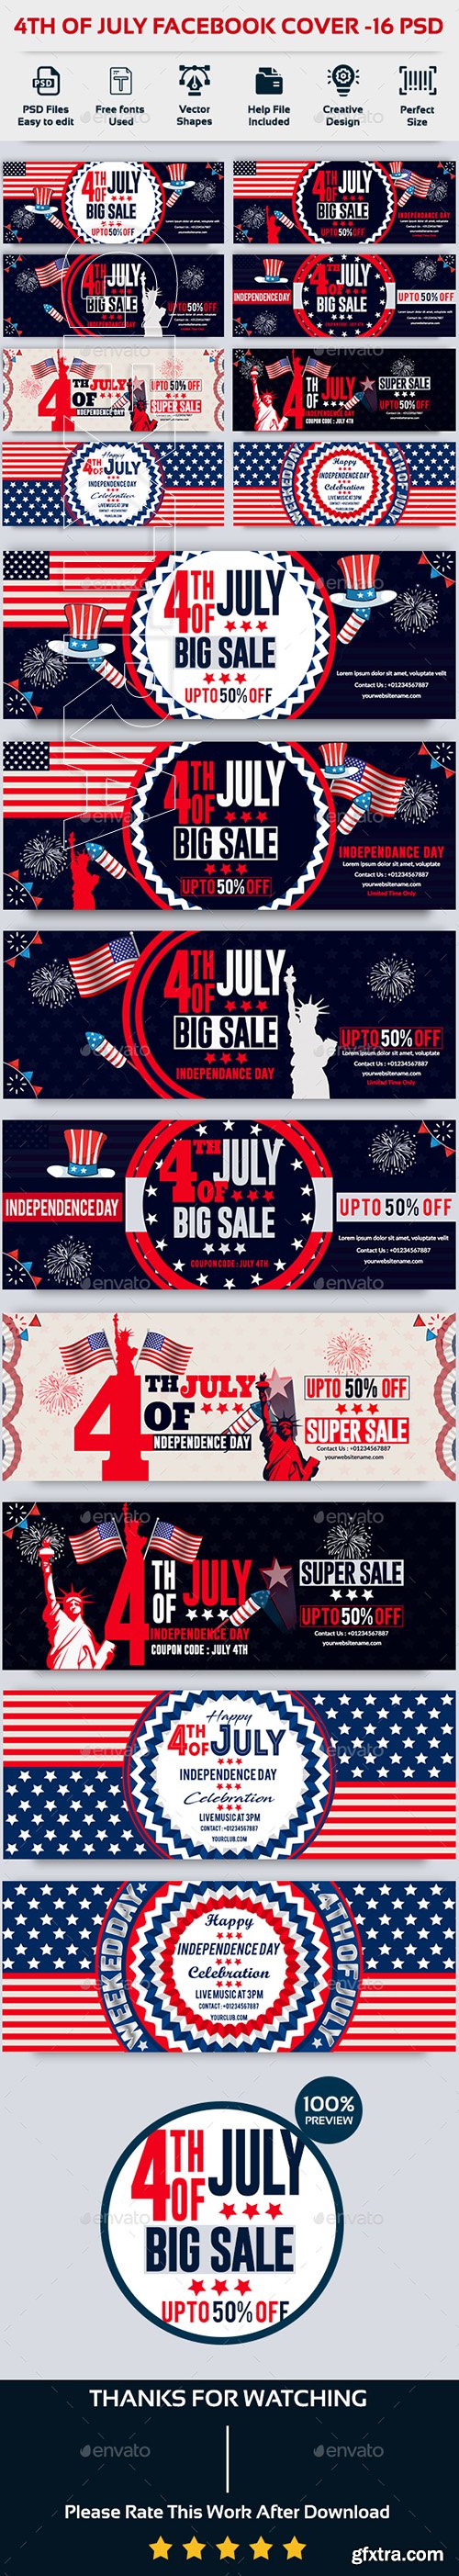 GraphicRiver - 4th of July Facebook Cover-Bundle-16 PSD 22208538